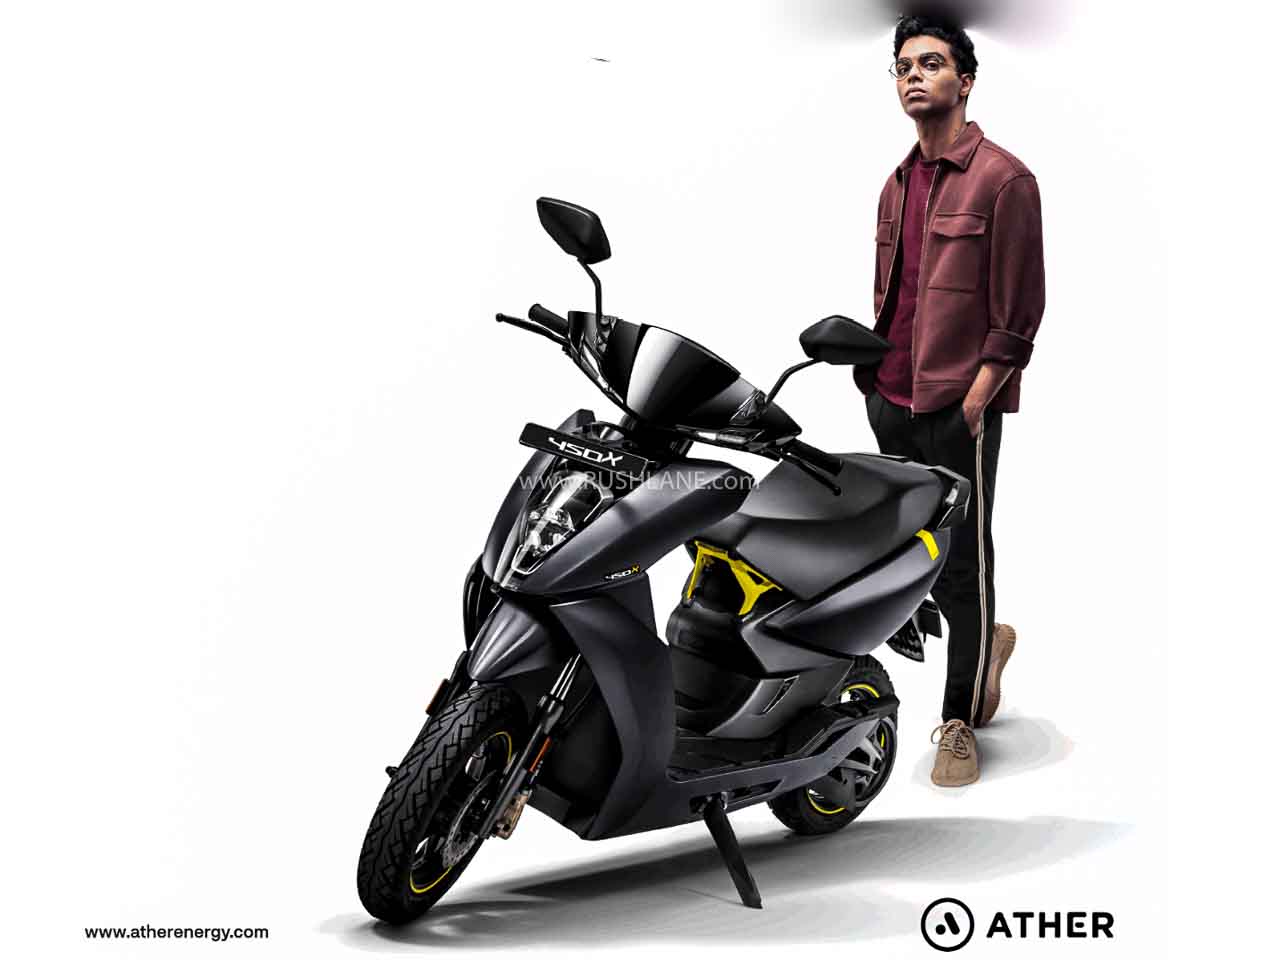 Ather 450x Electric Scooter Gets Performance Improvements Via OTA Update